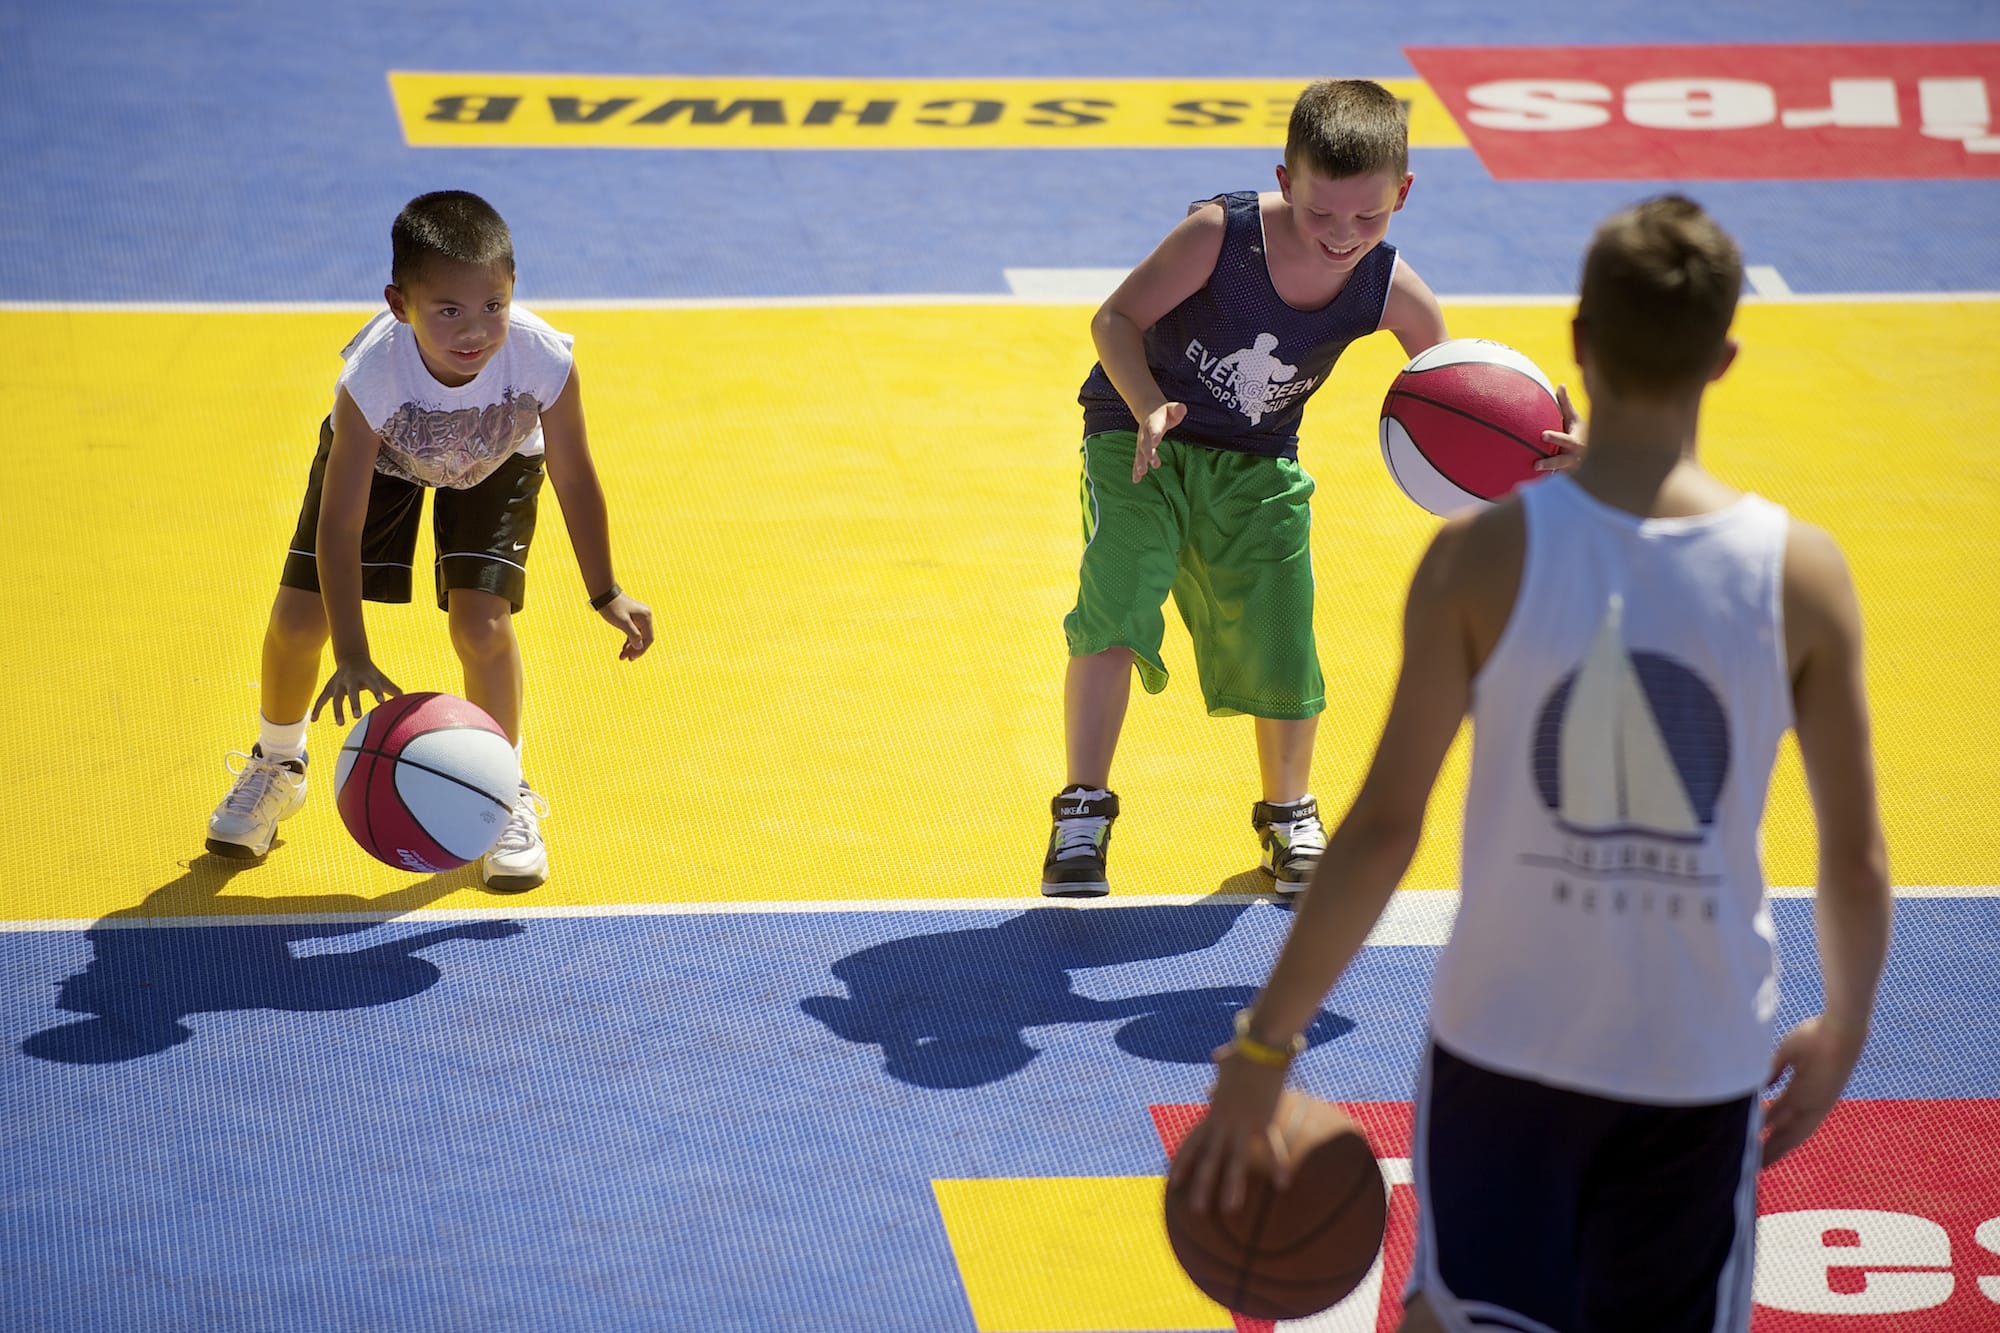 Eric Albios, 8, left, of Vancouver, and Keoni Jones, 9, of Vancouver, practice dribbling skills Friday August 17, 2012 at a kids clinic as part of the kick off for the weekend-long Hoops on the River, a 3-on-3 basketball tournament.